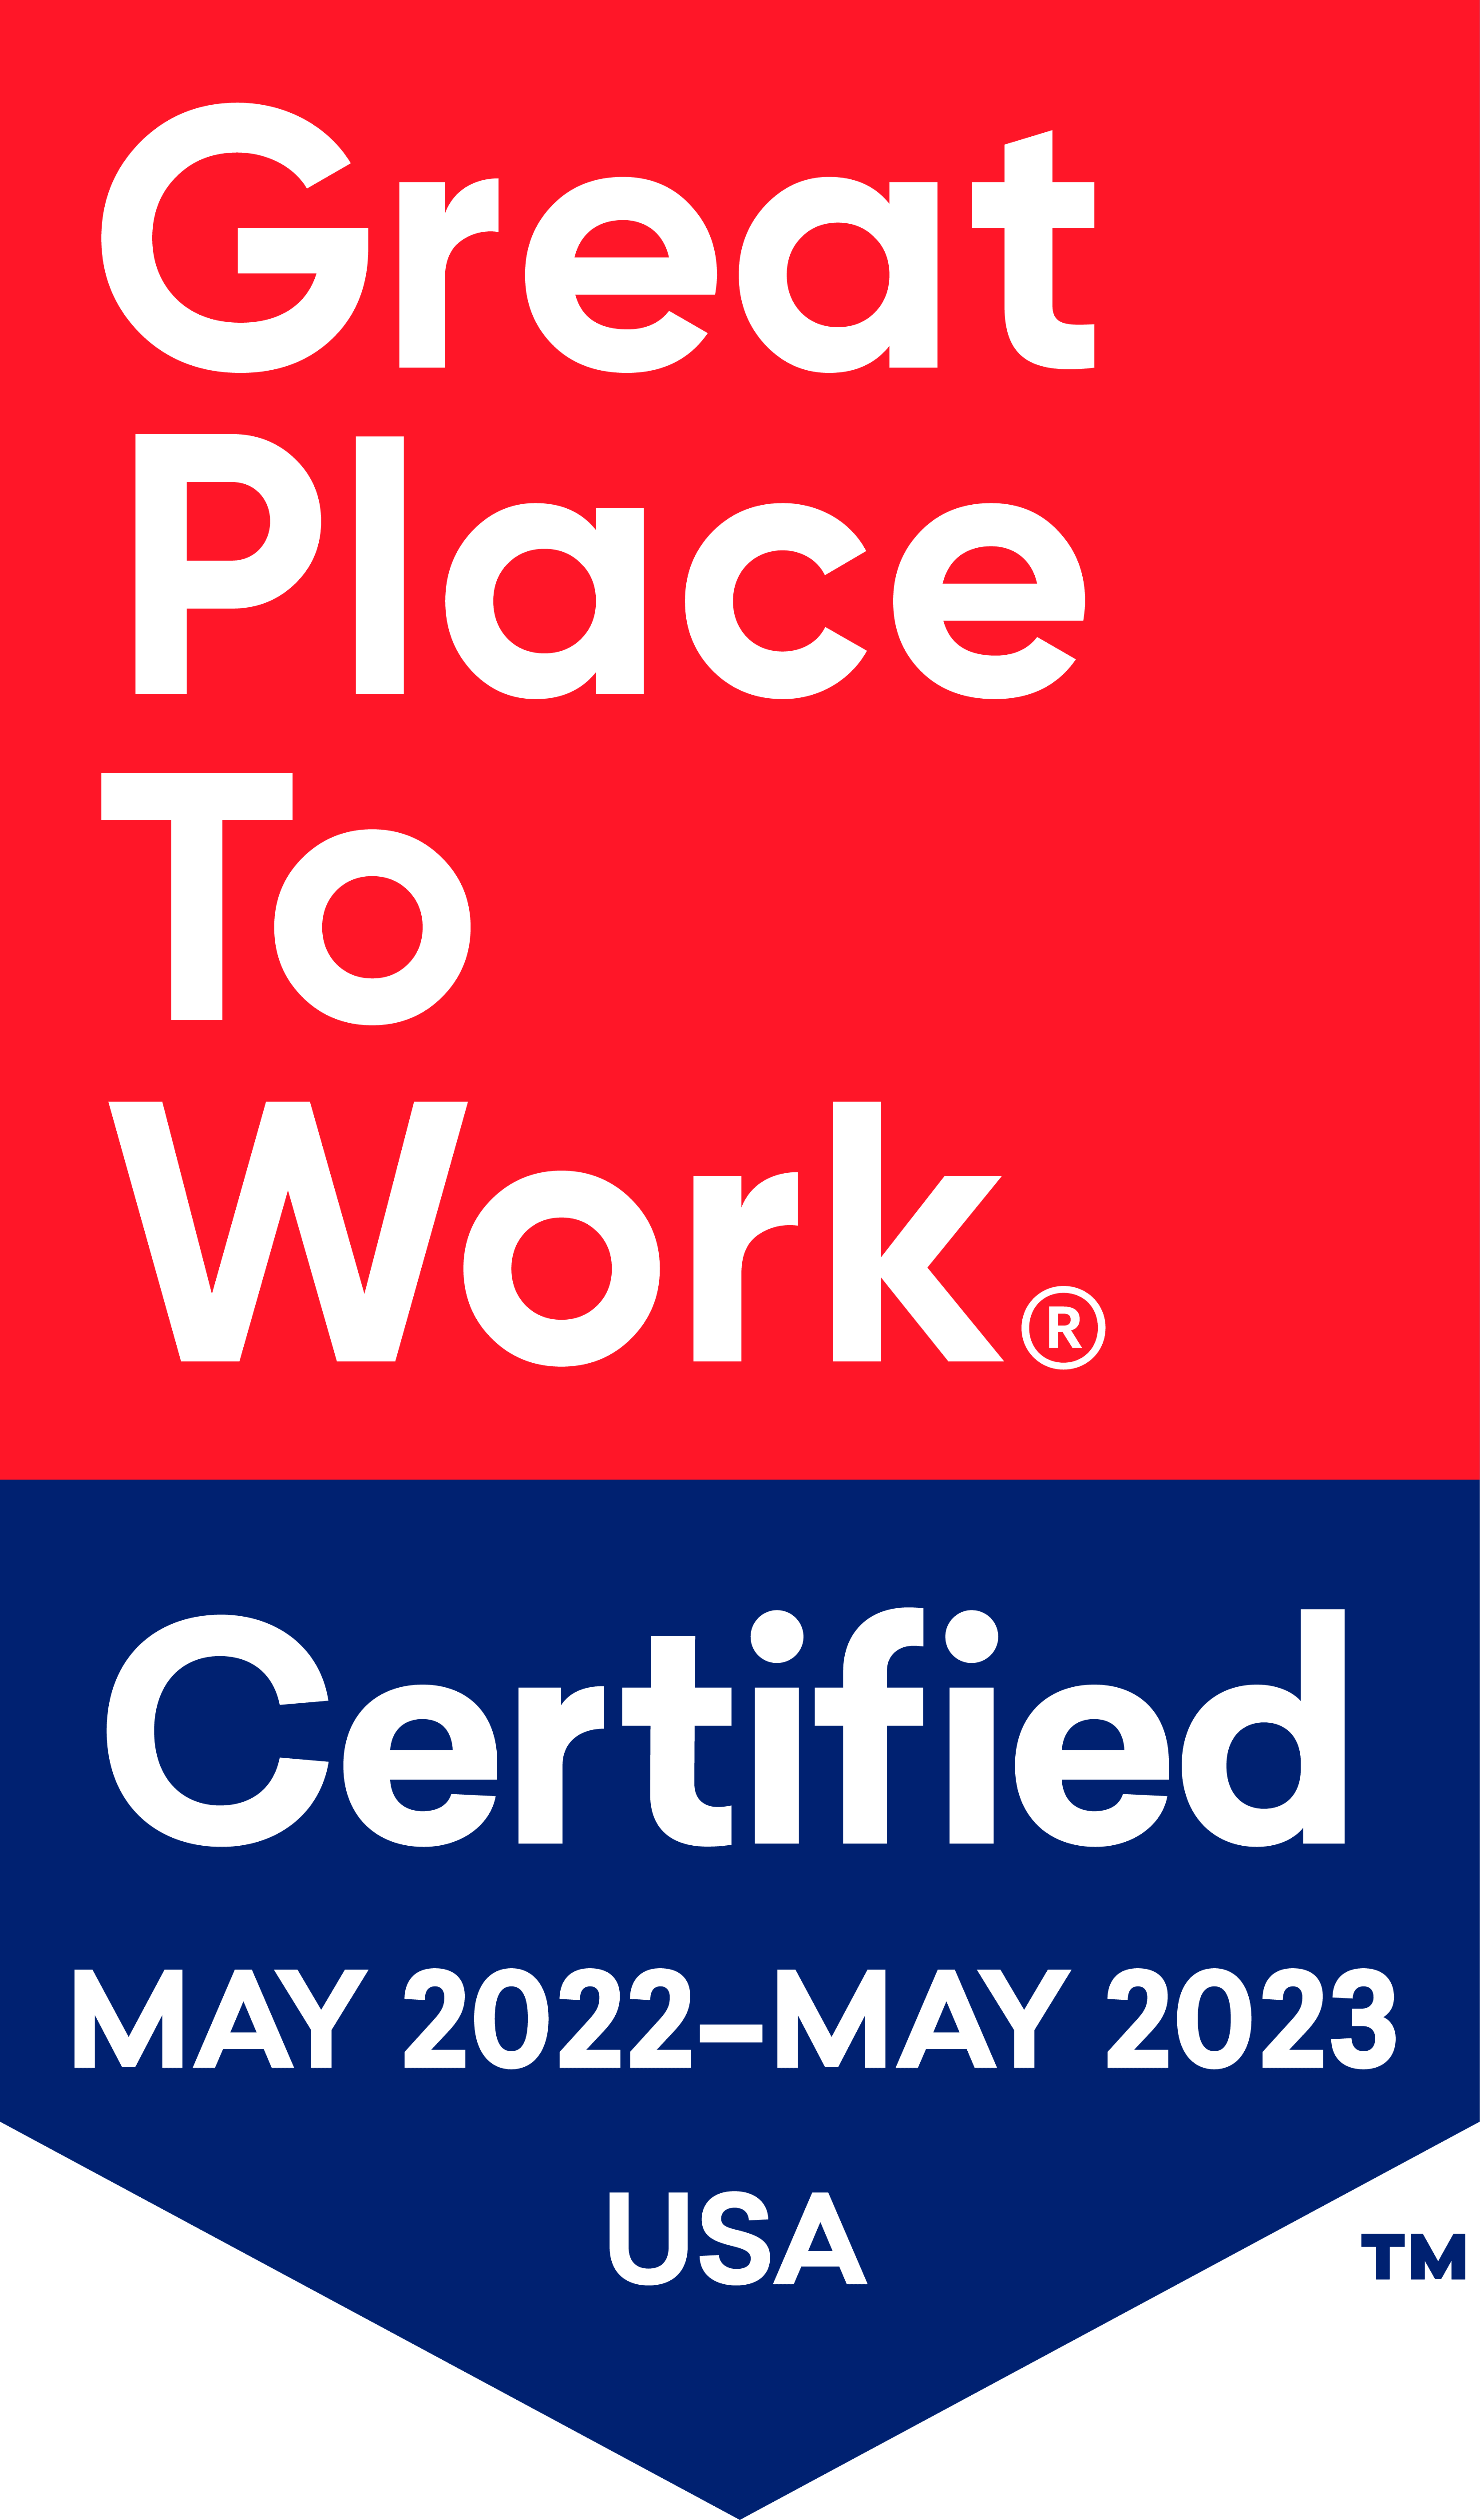 The Wellington is Great Place To Work Certified